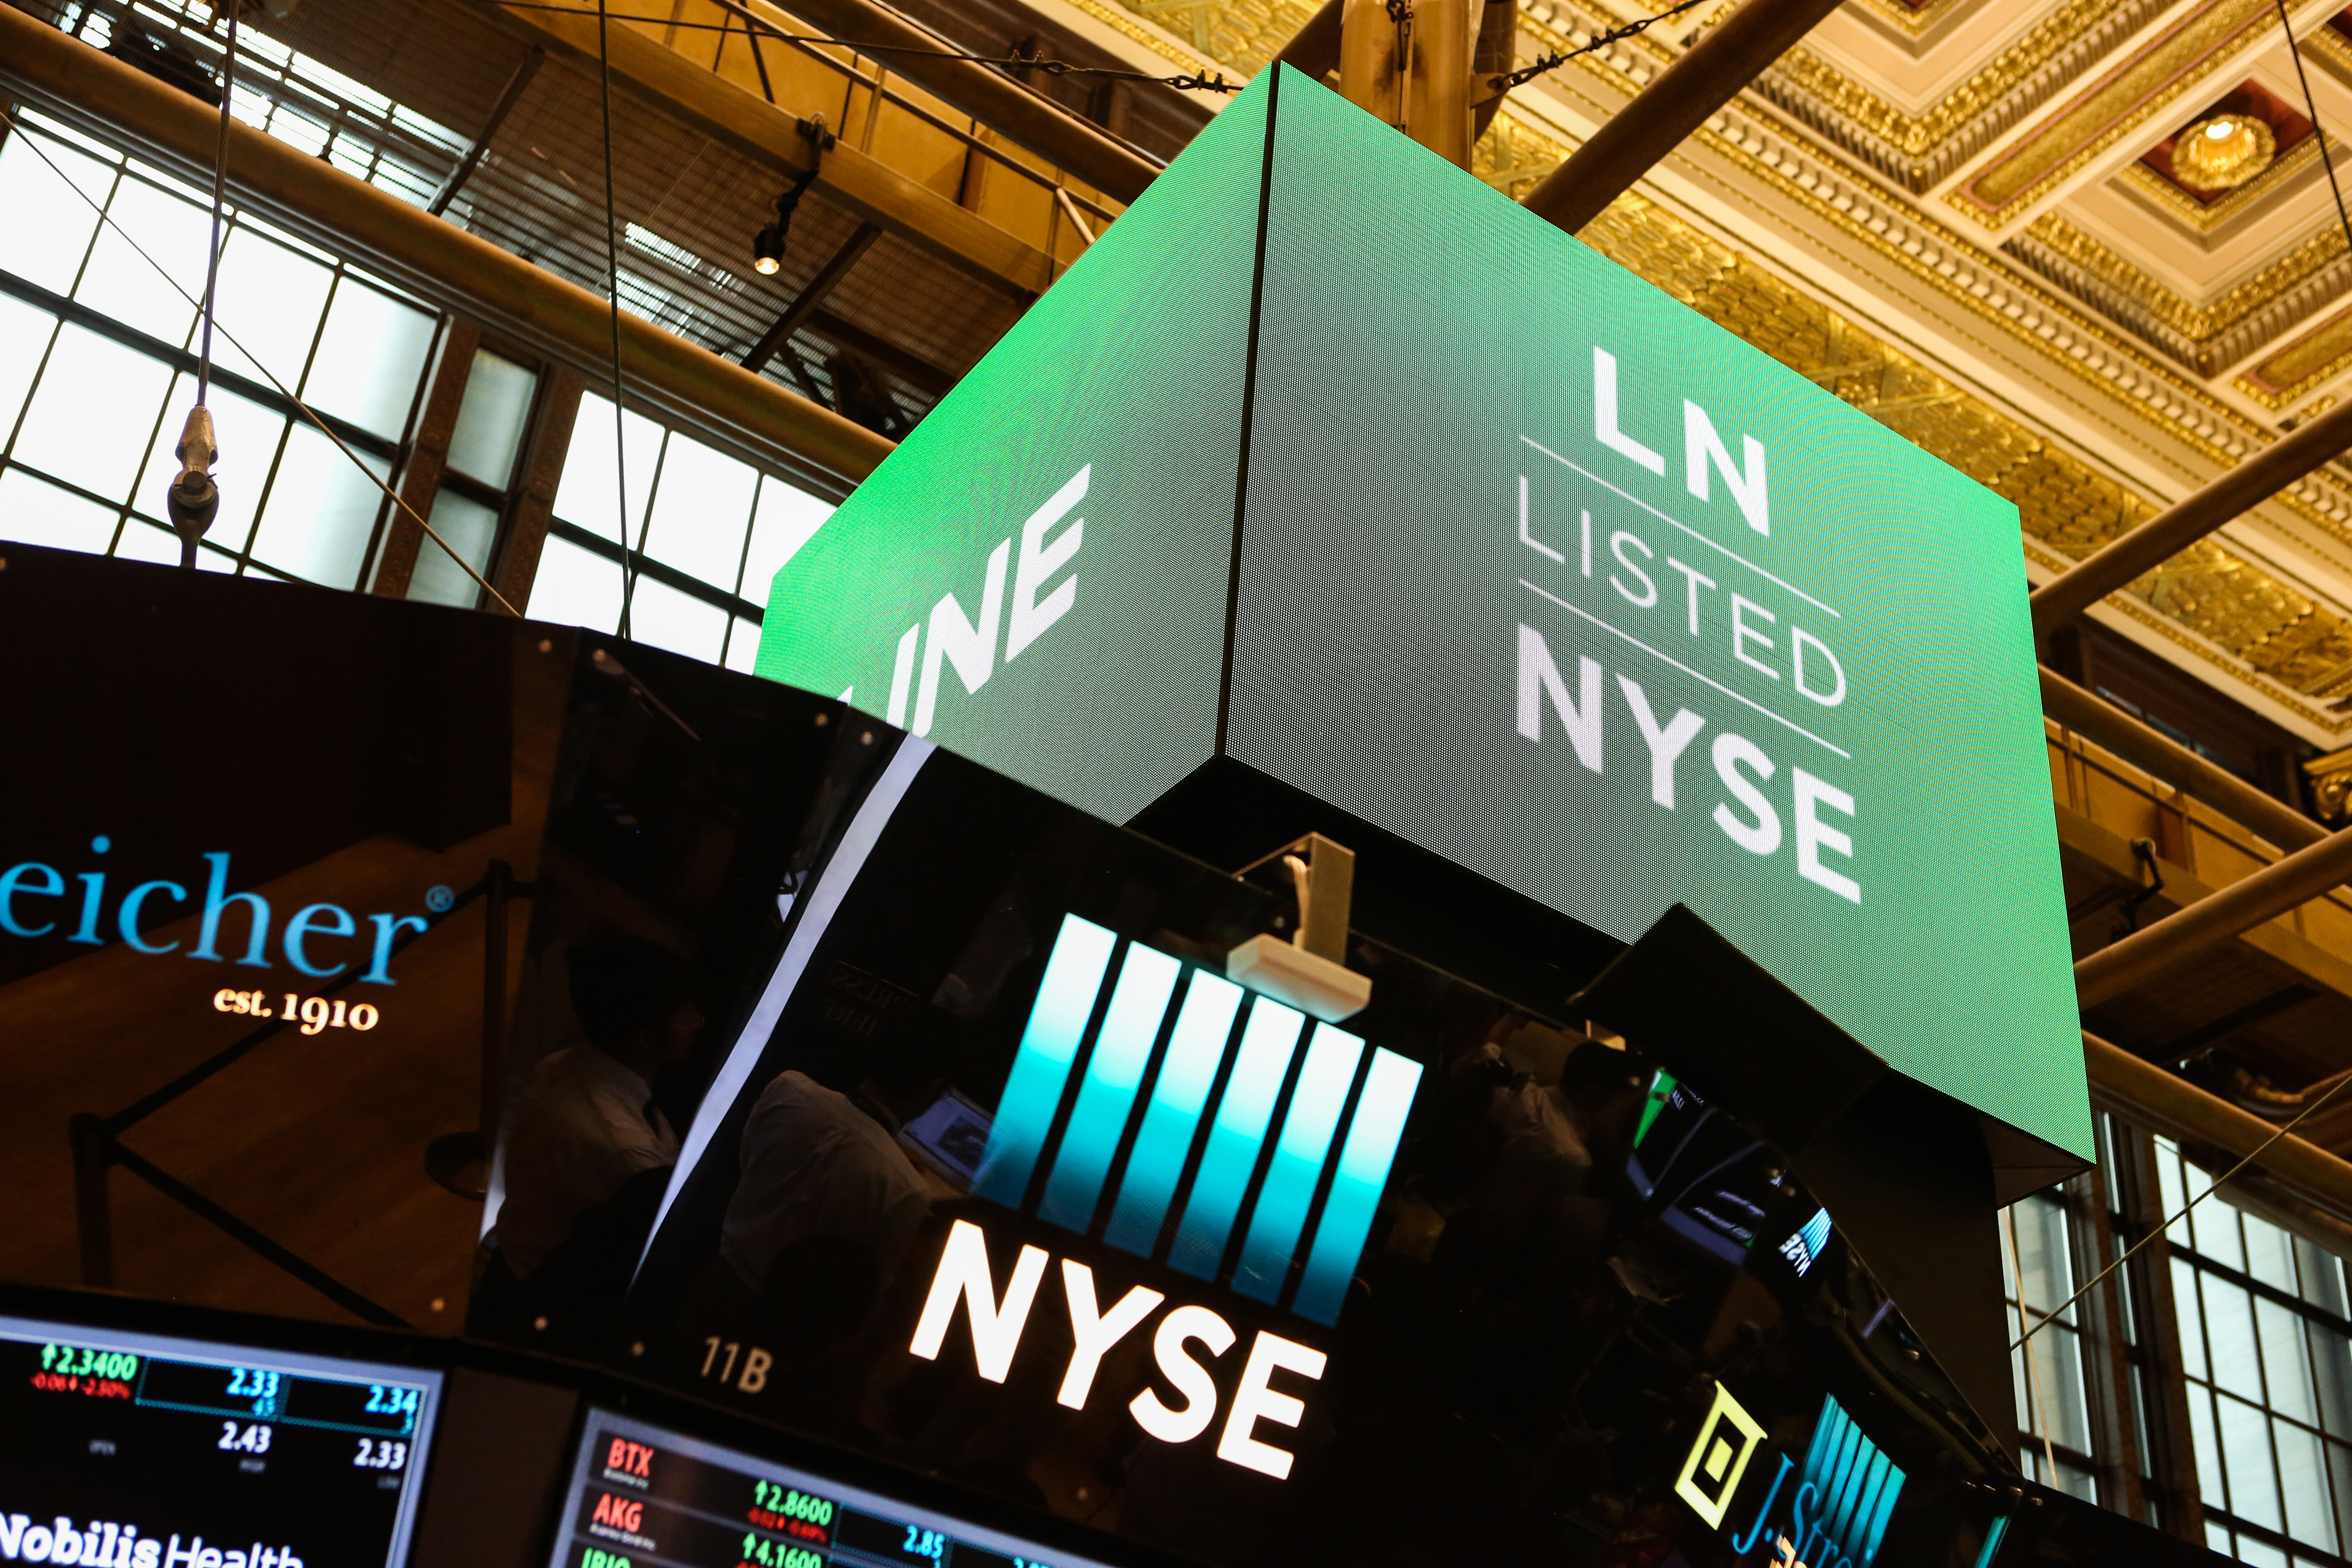 Trading On The Floor Of The NYSE As Line Corp. Debuts IPO